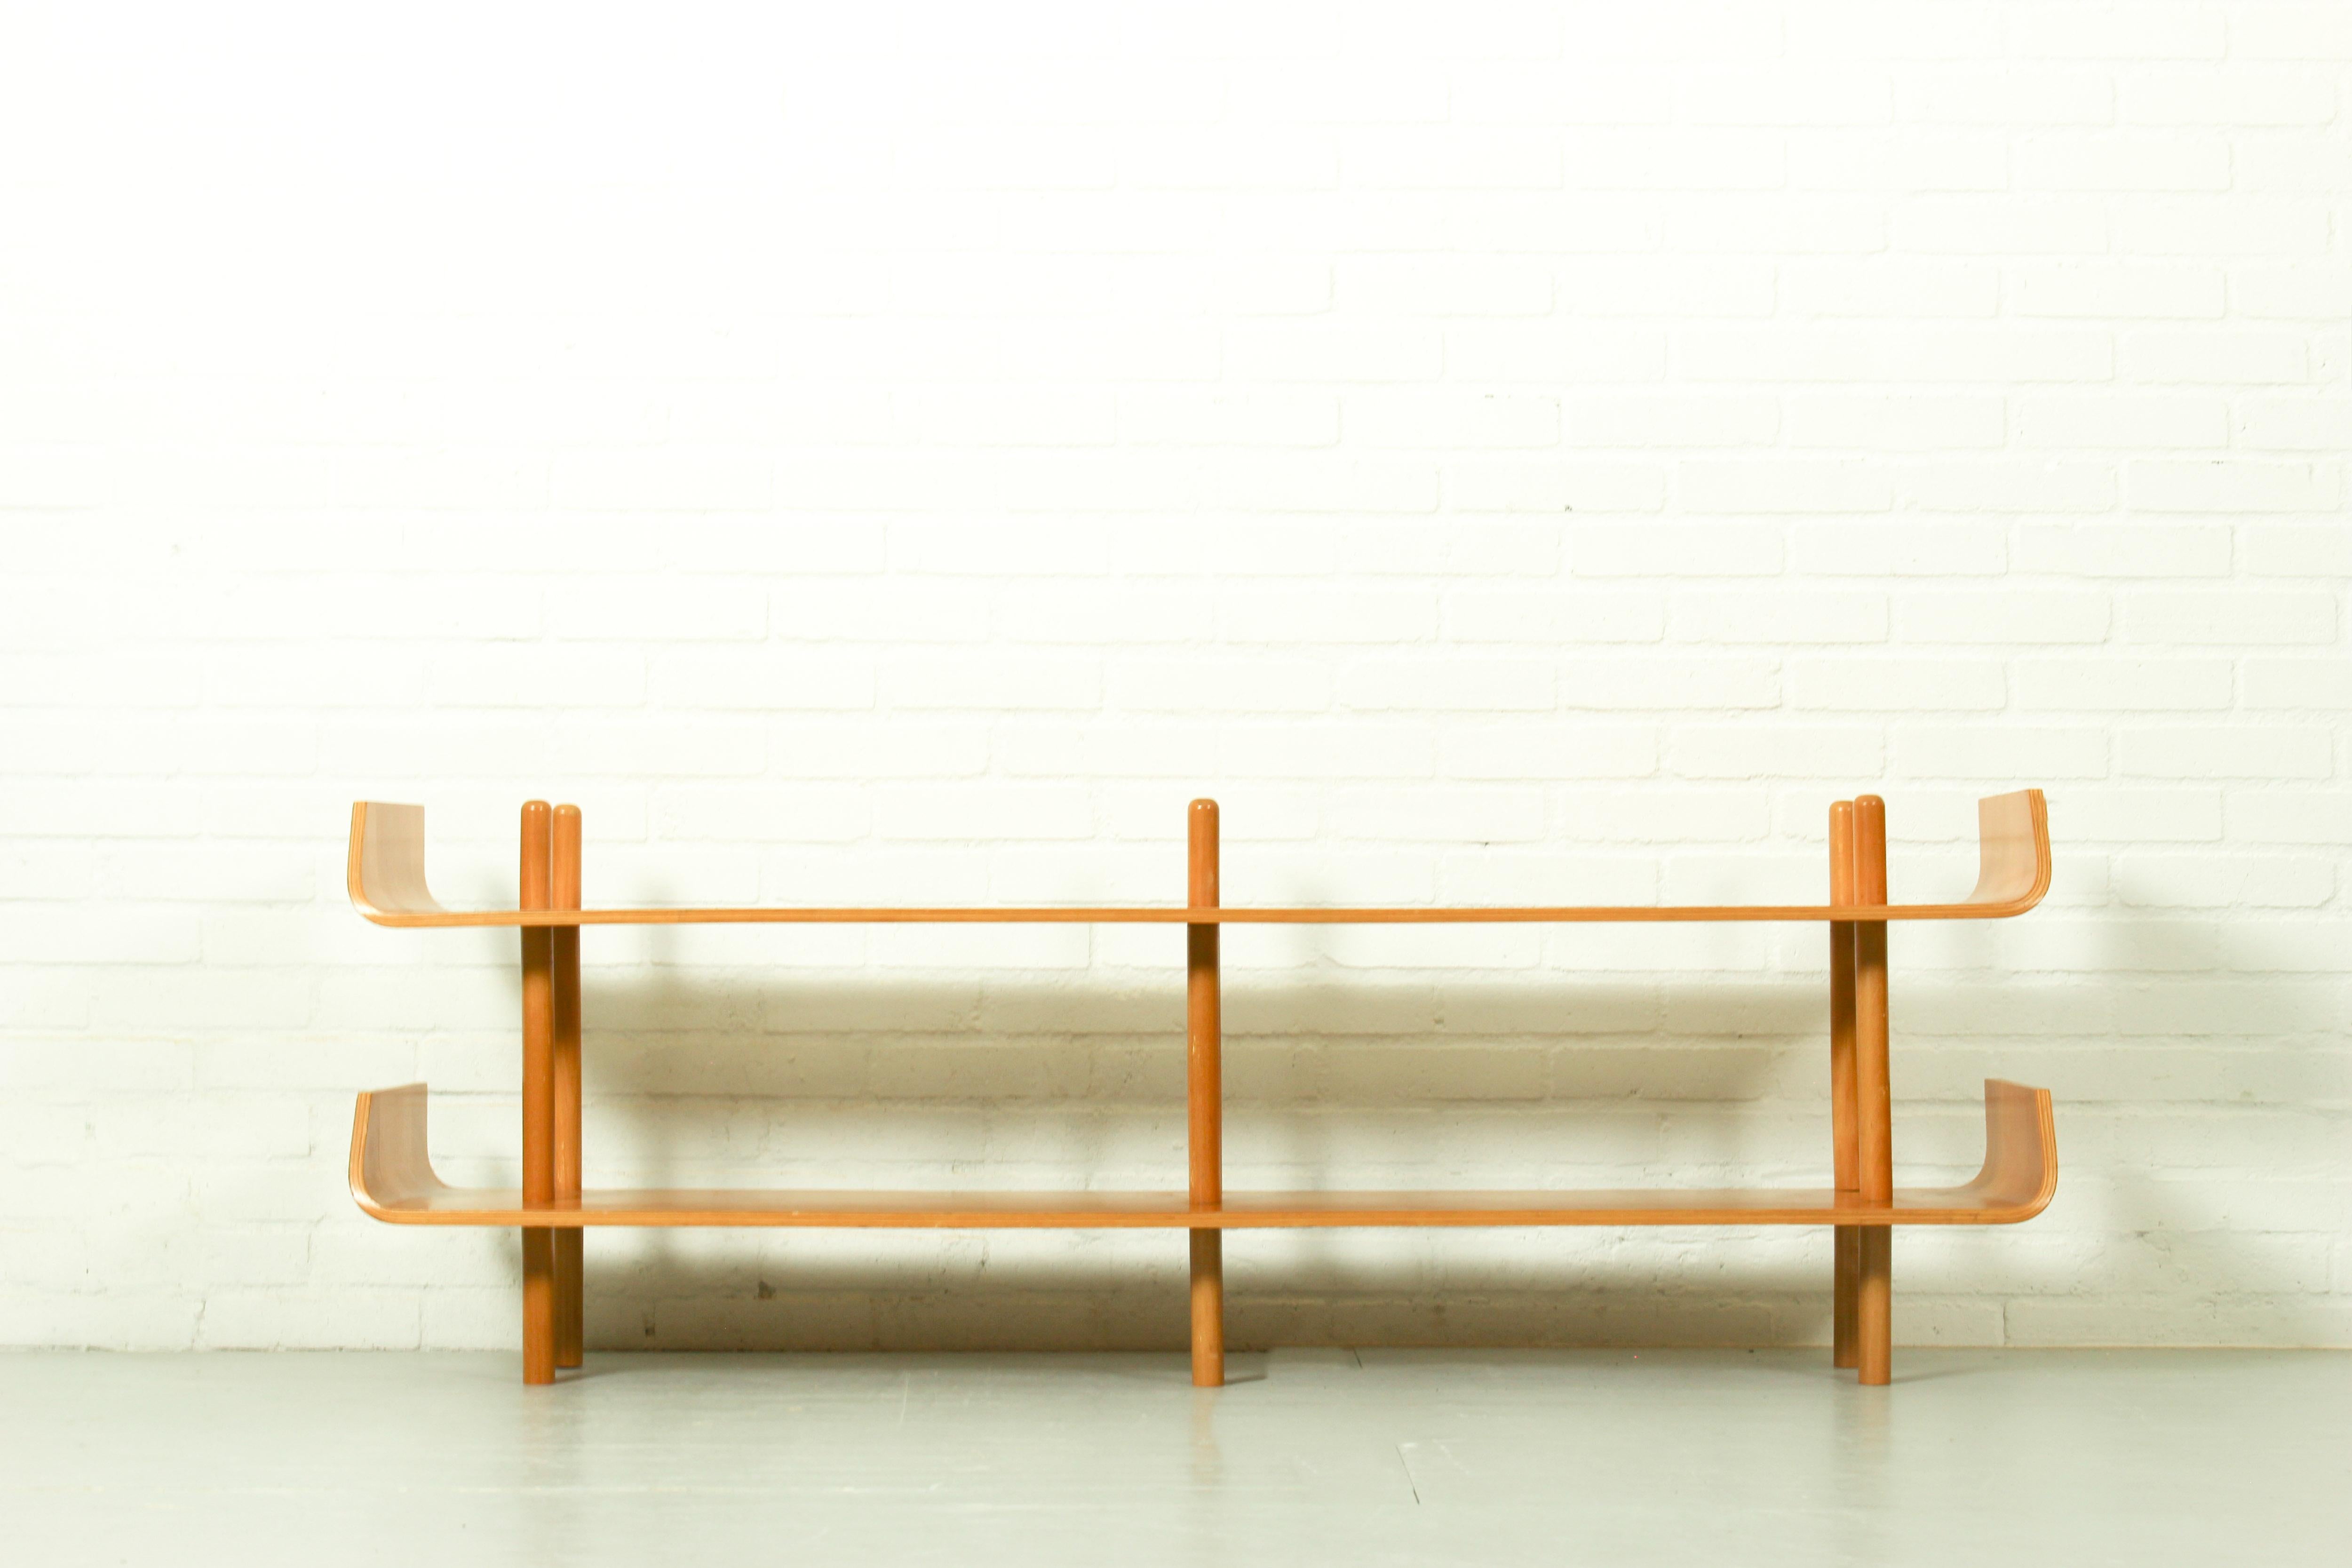 Bookshelf Model 545 by Willem Lutjens for Gouda den Boer, 1953. Made of beech plywood, timeless and organic design! The bentwood ends are typical for these bookshelves, they are connected by poles. It is in good condition.

Dimensions: 53cm h, 150cm